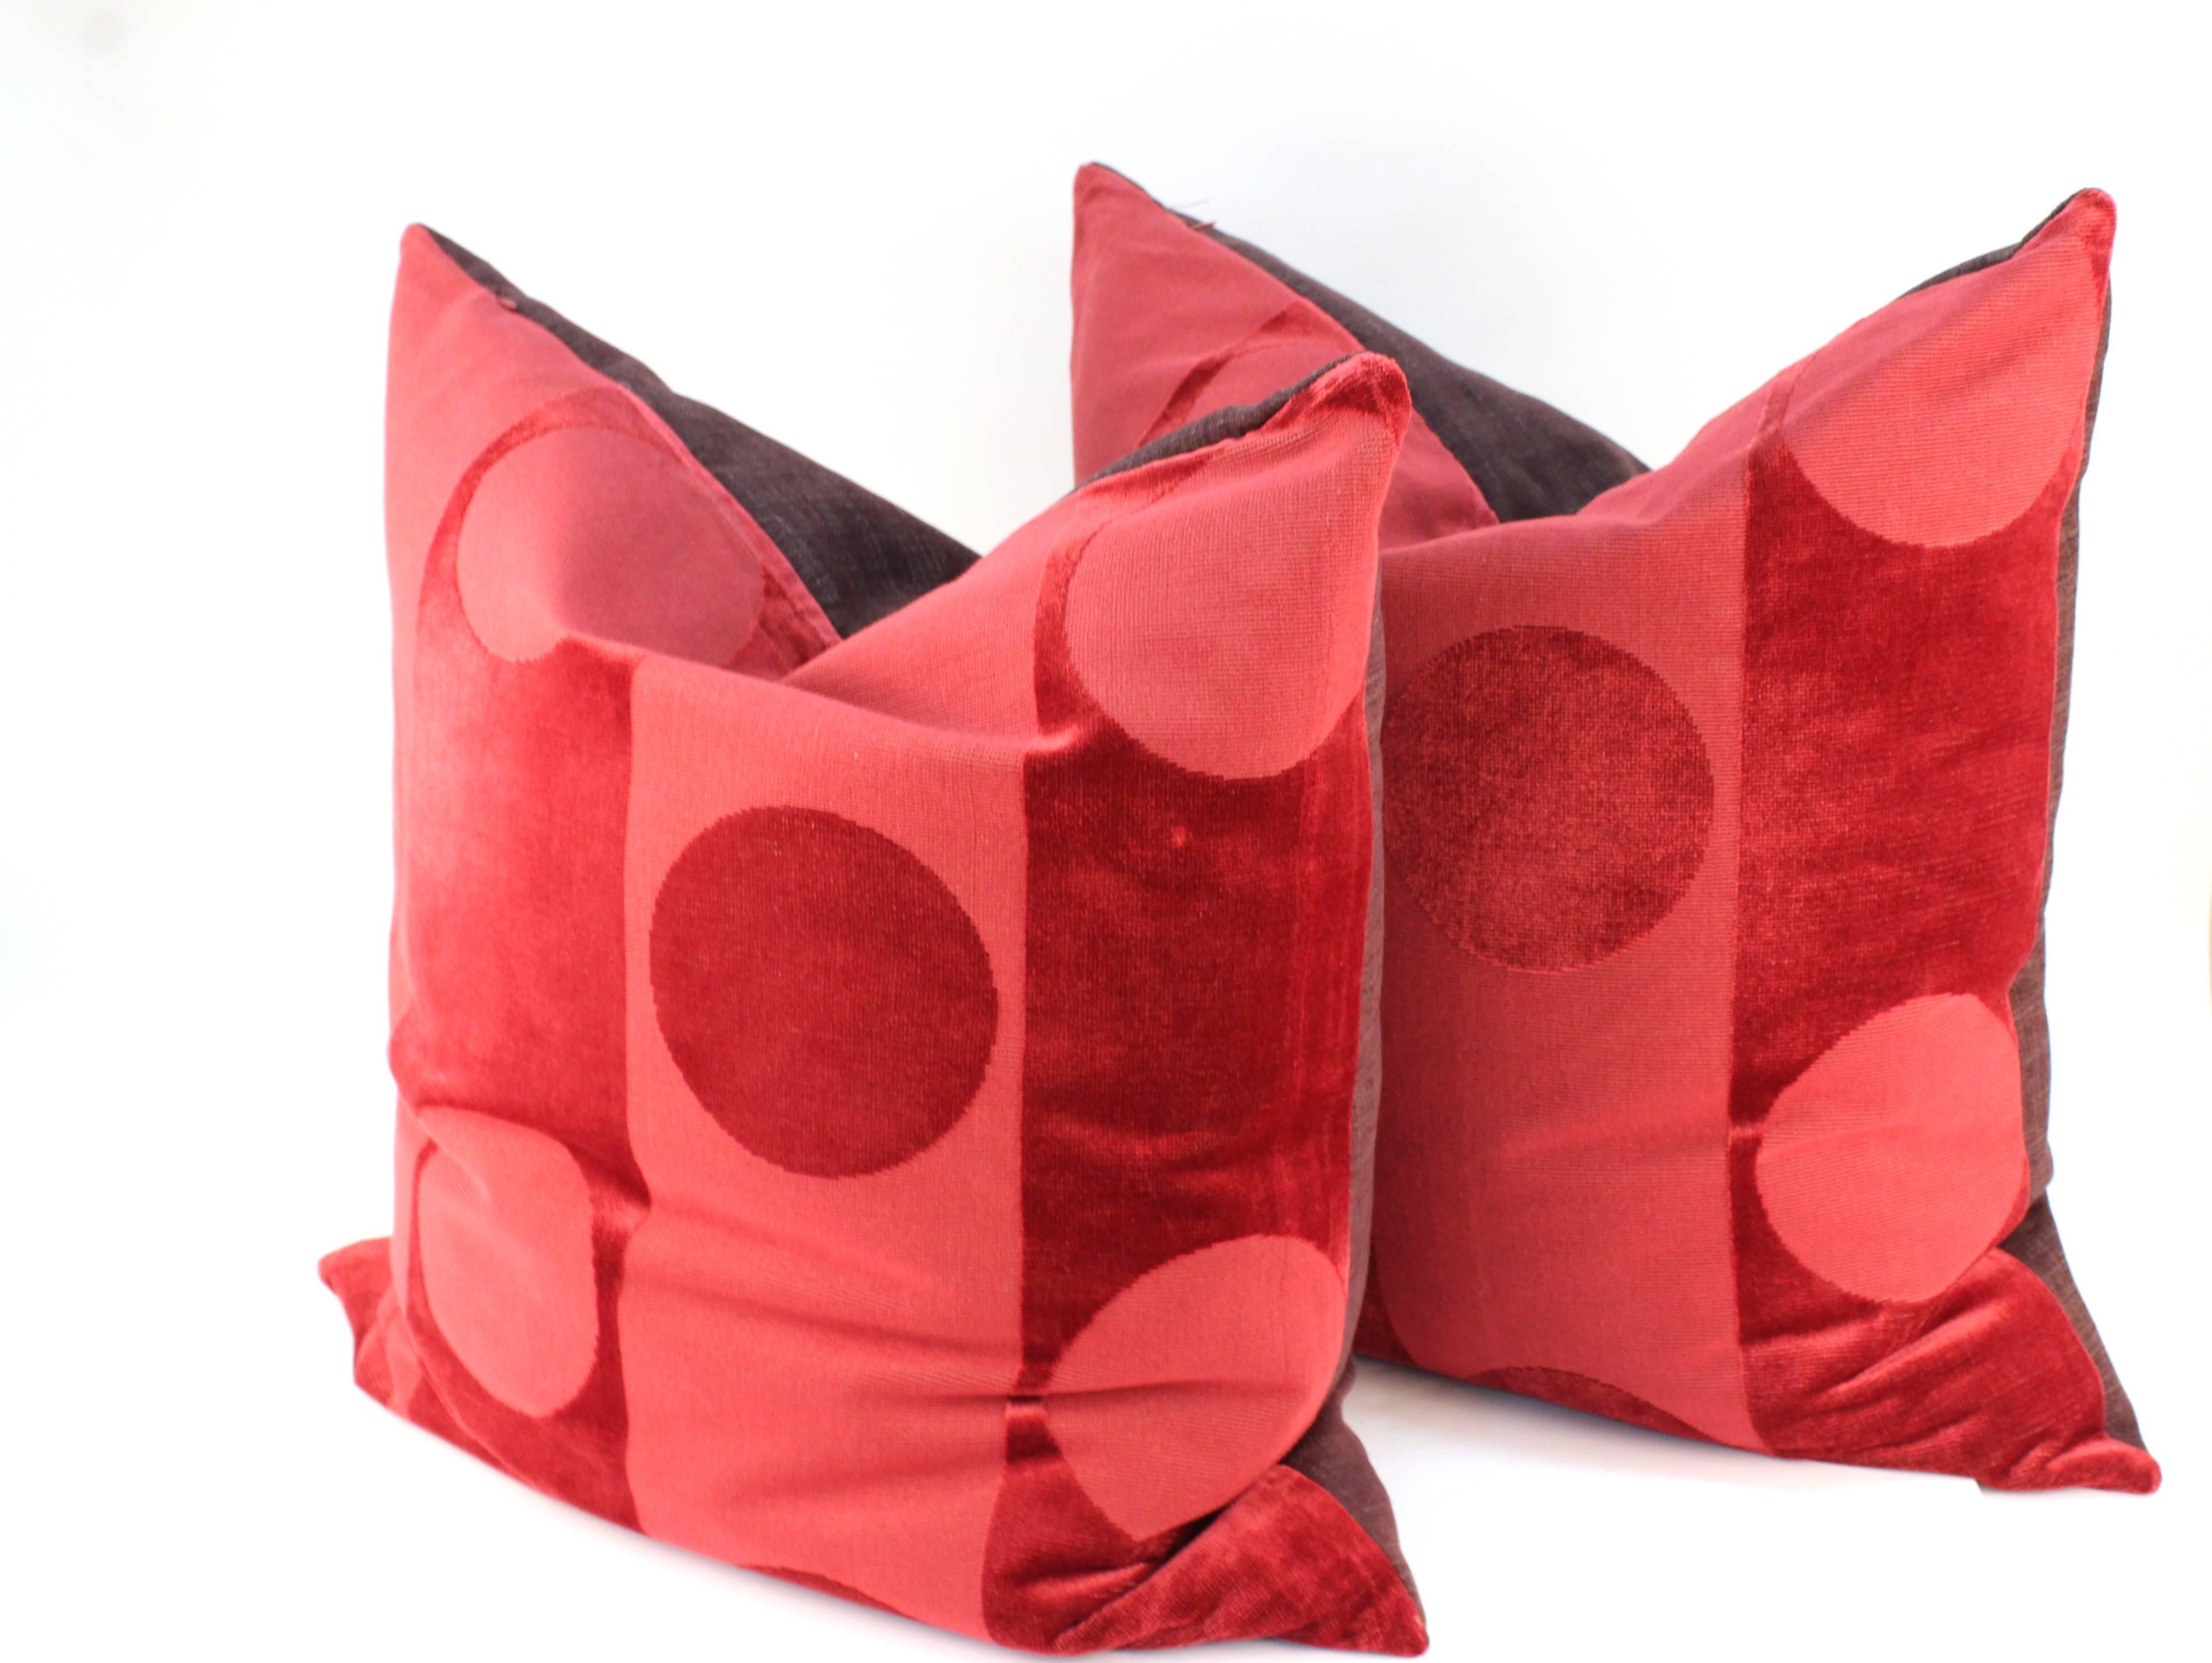 A pair of contemporary down pillows in Clarence House Fabric. The fabric is patterned in alternating shades of red with stripes and large dots. The pillows are in excellent condition.